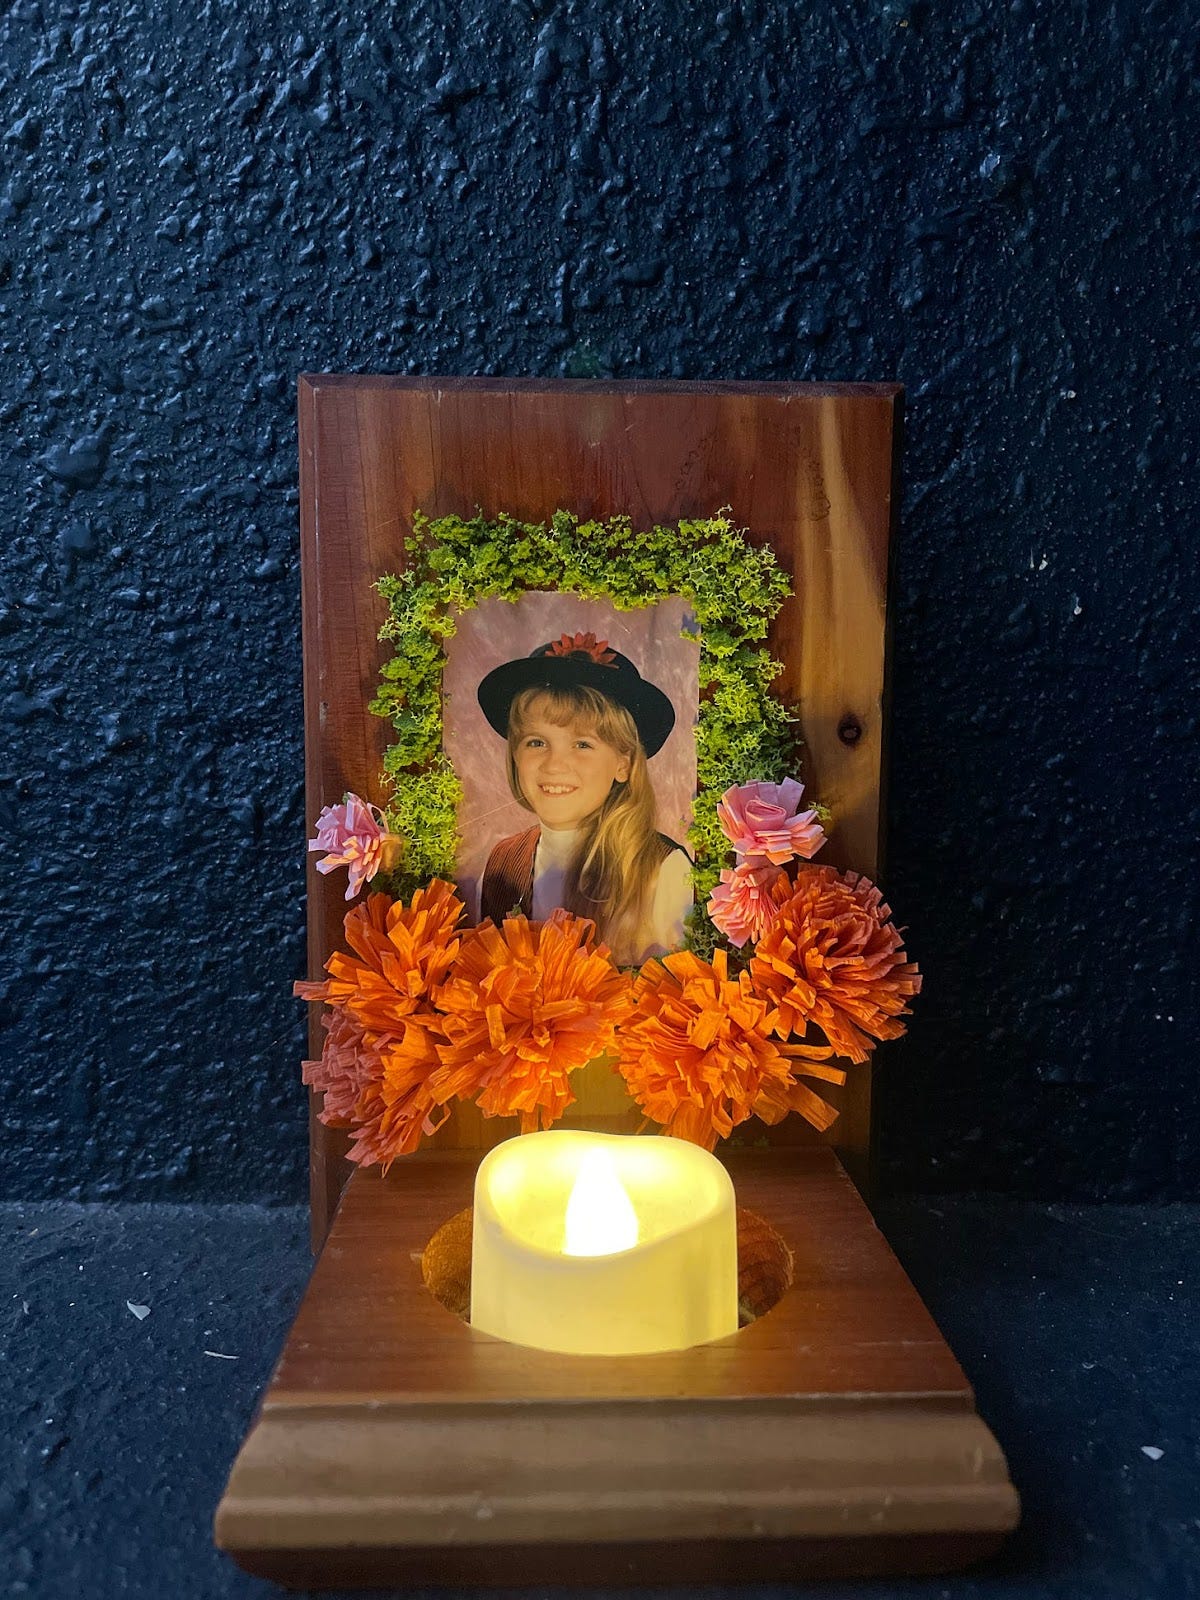 a dark blue wall background. There is a brown wooden wall sconce with a picture of a 11 year old girl with blonde hair and a black bowler hat with a red flower on it. The girl is smiling at the camera and is wearing a vest. Surrounding the picture are clumps of green moss and orangea nd pink flowers cut out of paper. There is an electric candle in front. It is an altar to the author's inner child.